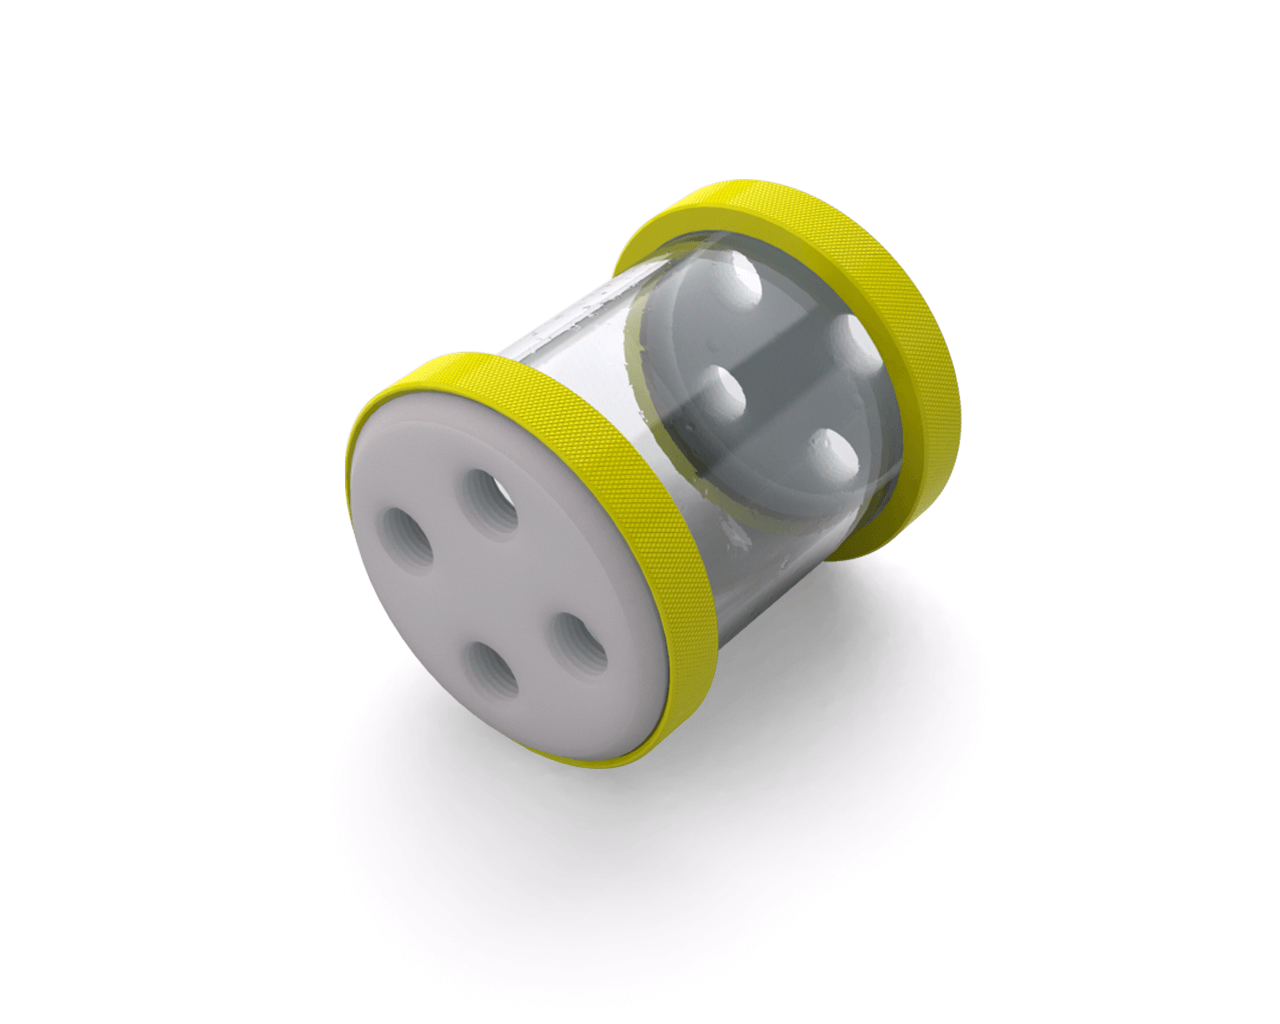 PrimoChill CTR Low Profile Phase II Reservoir - White POM - 80mm - PrimoChill - KEEPING IT COOL Lime Yellow